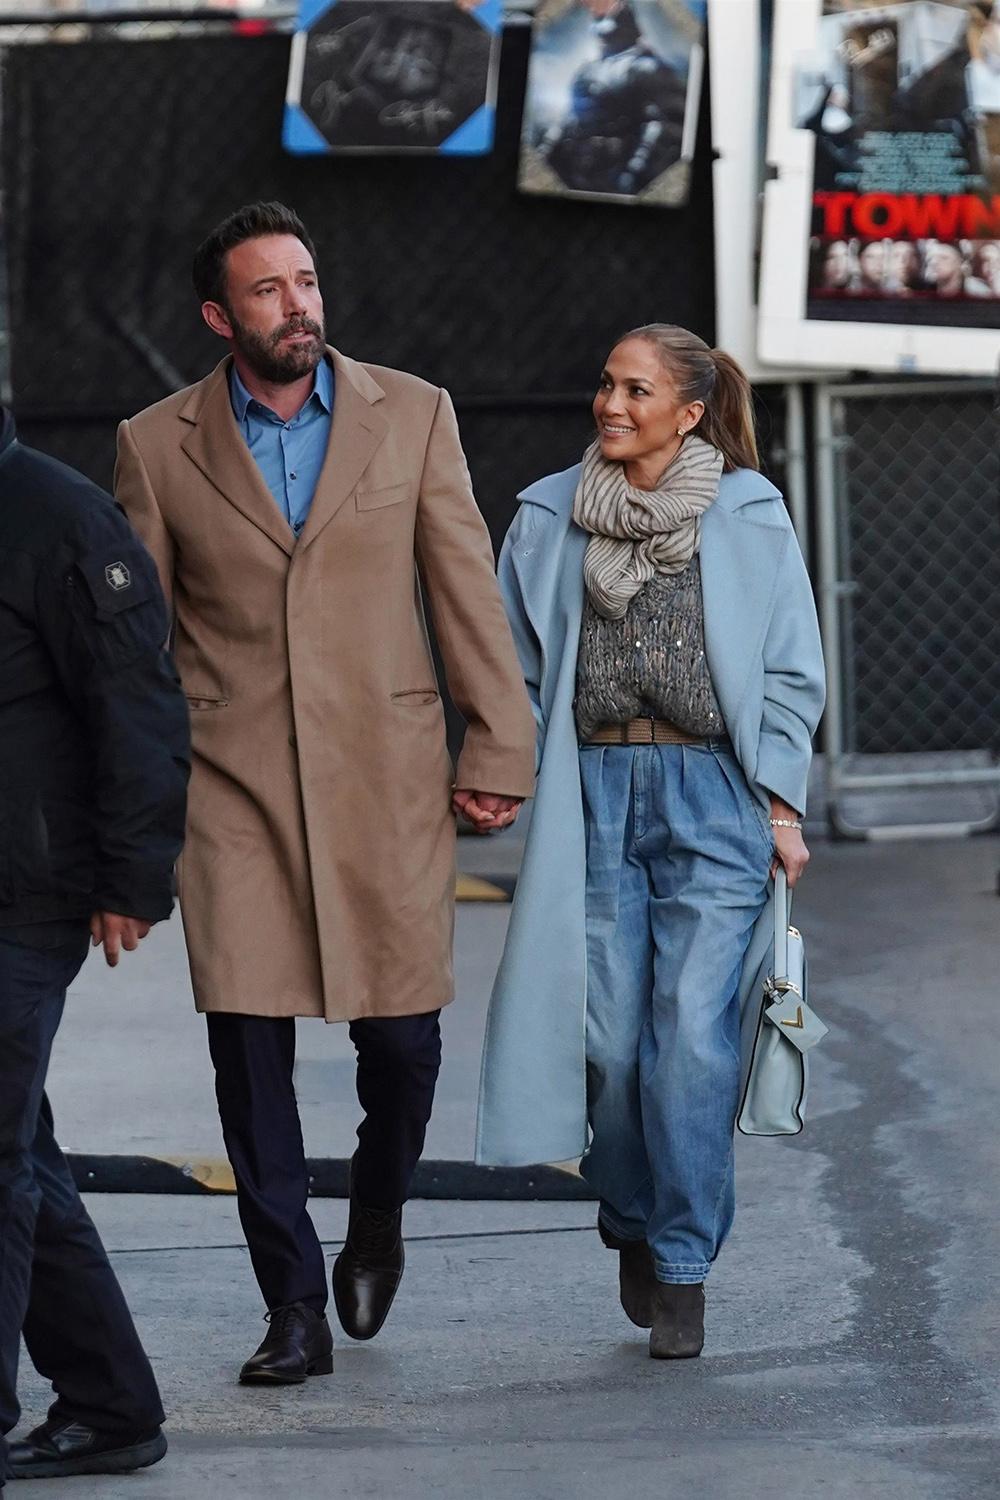 Jennifer Lopez has a short short at the music studio with Ben Affleck and her son Max, 13 years old - photos